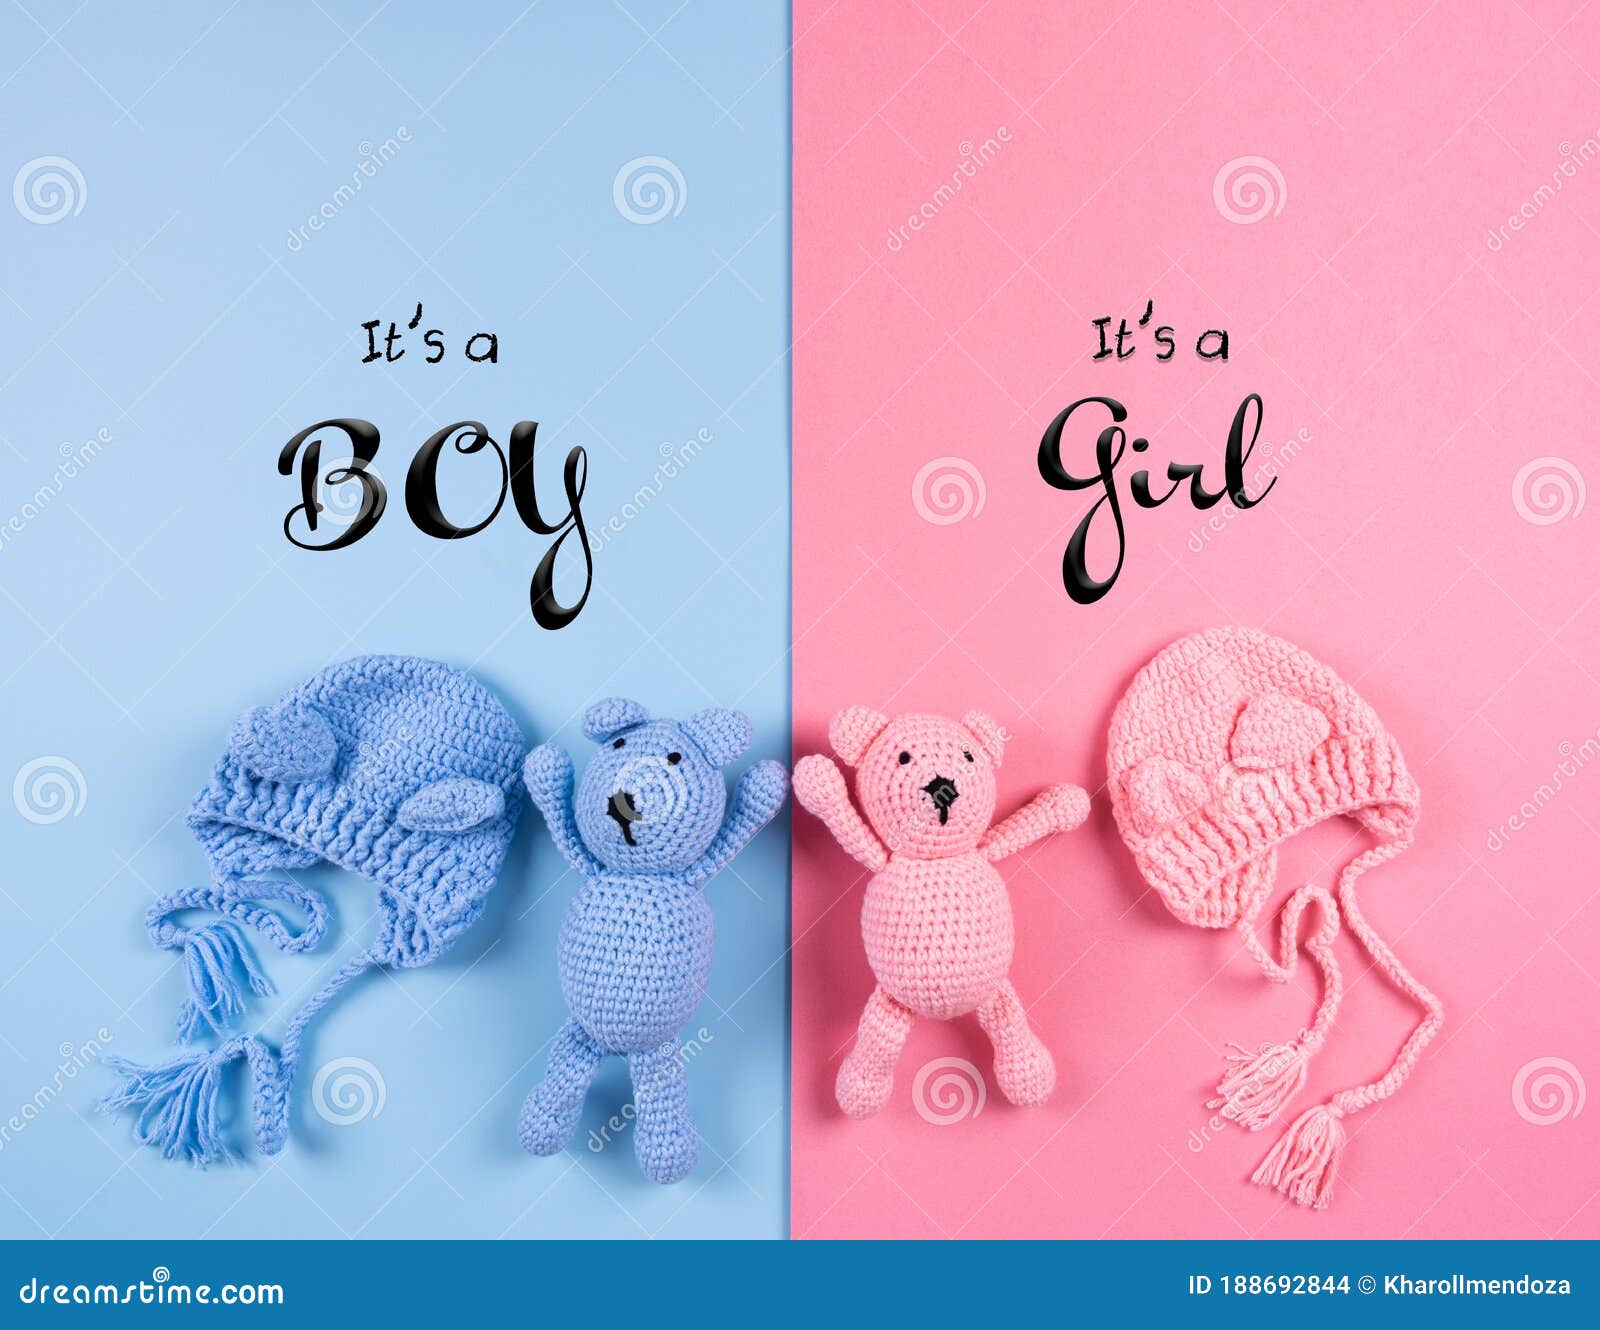 gender-reveal-party-baby-shower-birthday-invitation-or-greeting-card